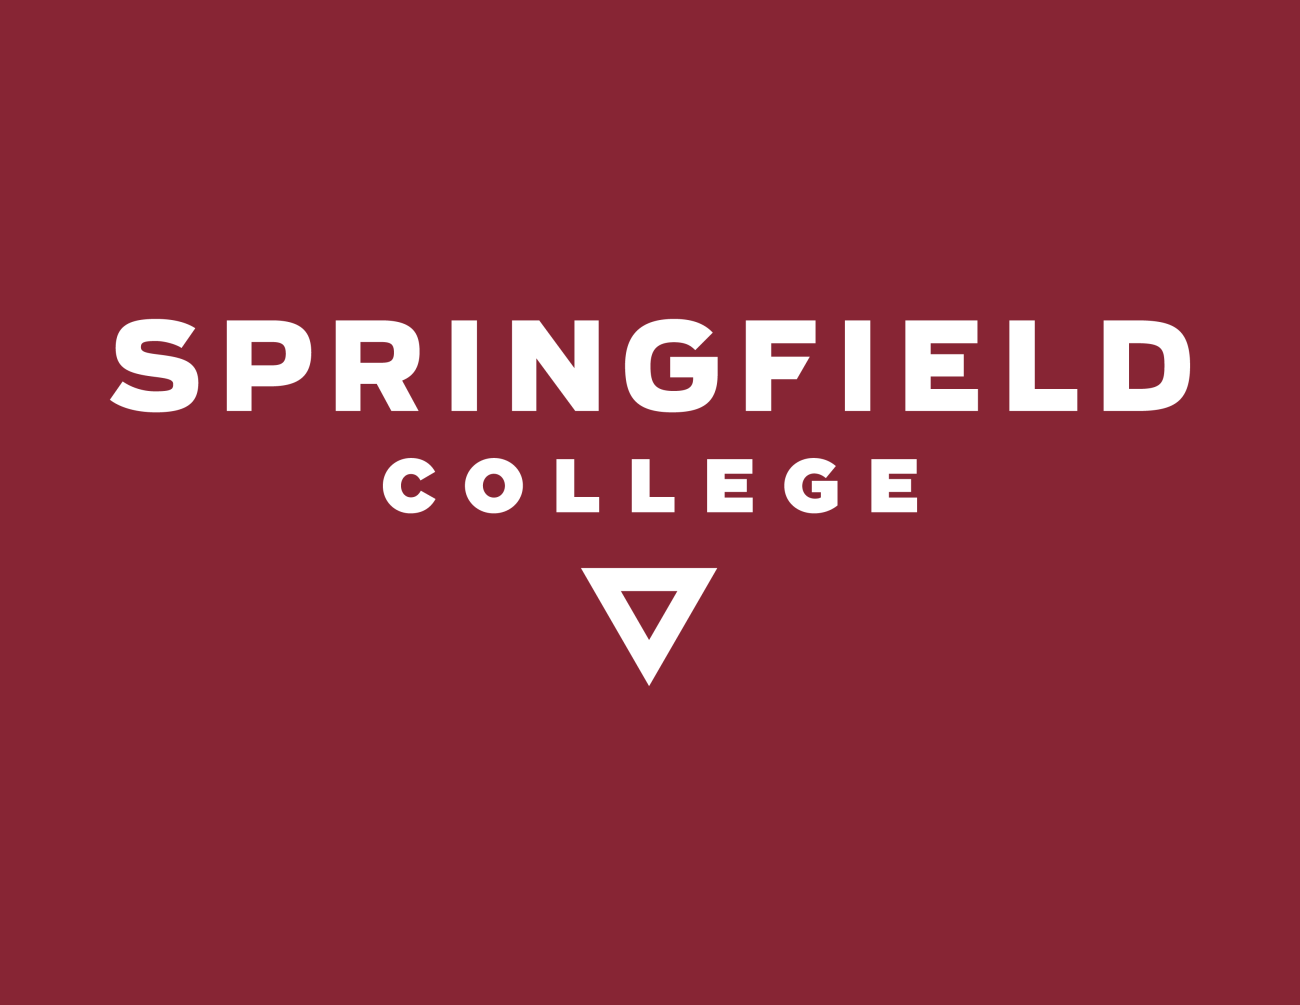 Springfield College logo with maroon colored background